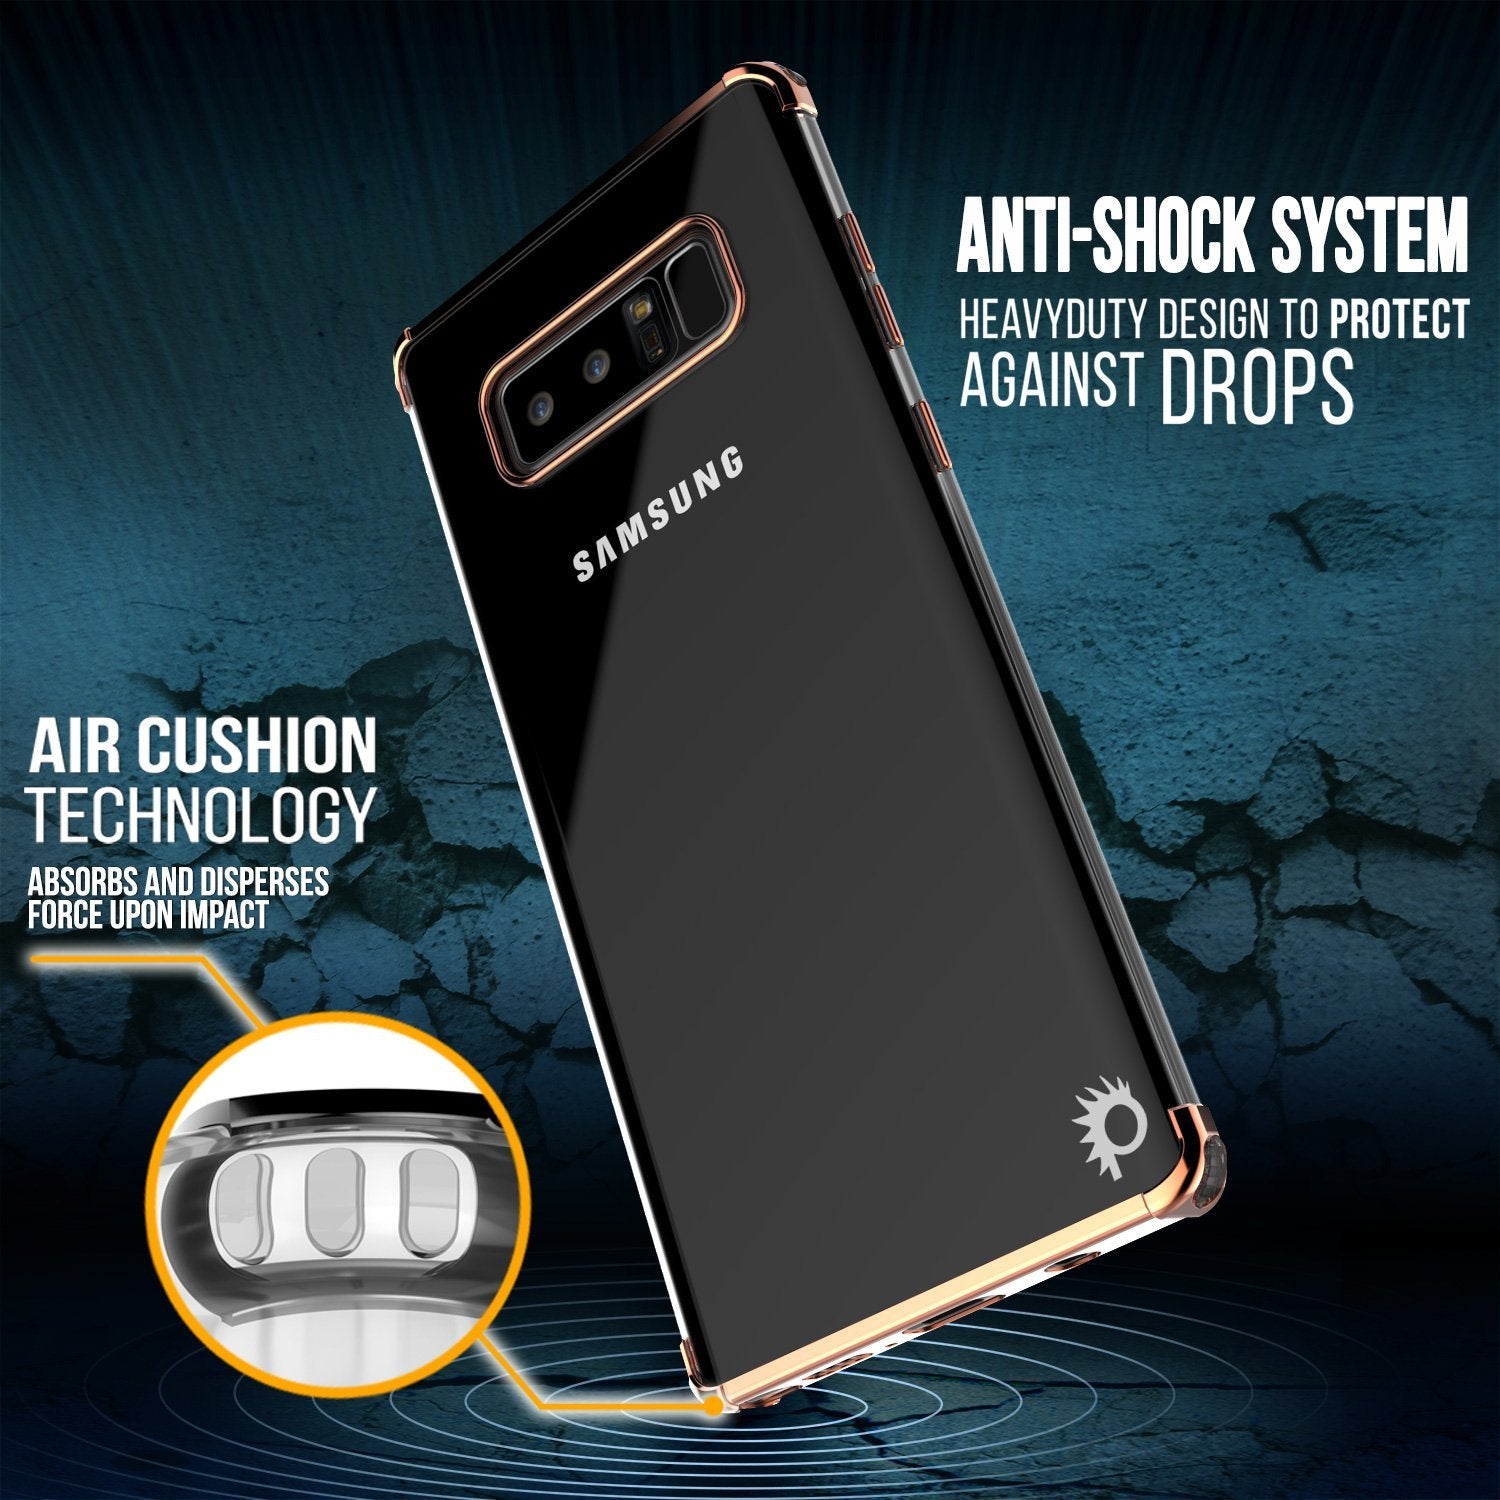 Note 8 Punkcase [BLAZE SERIES] Protective Cover W/Slim Fit, ROSE GOLD